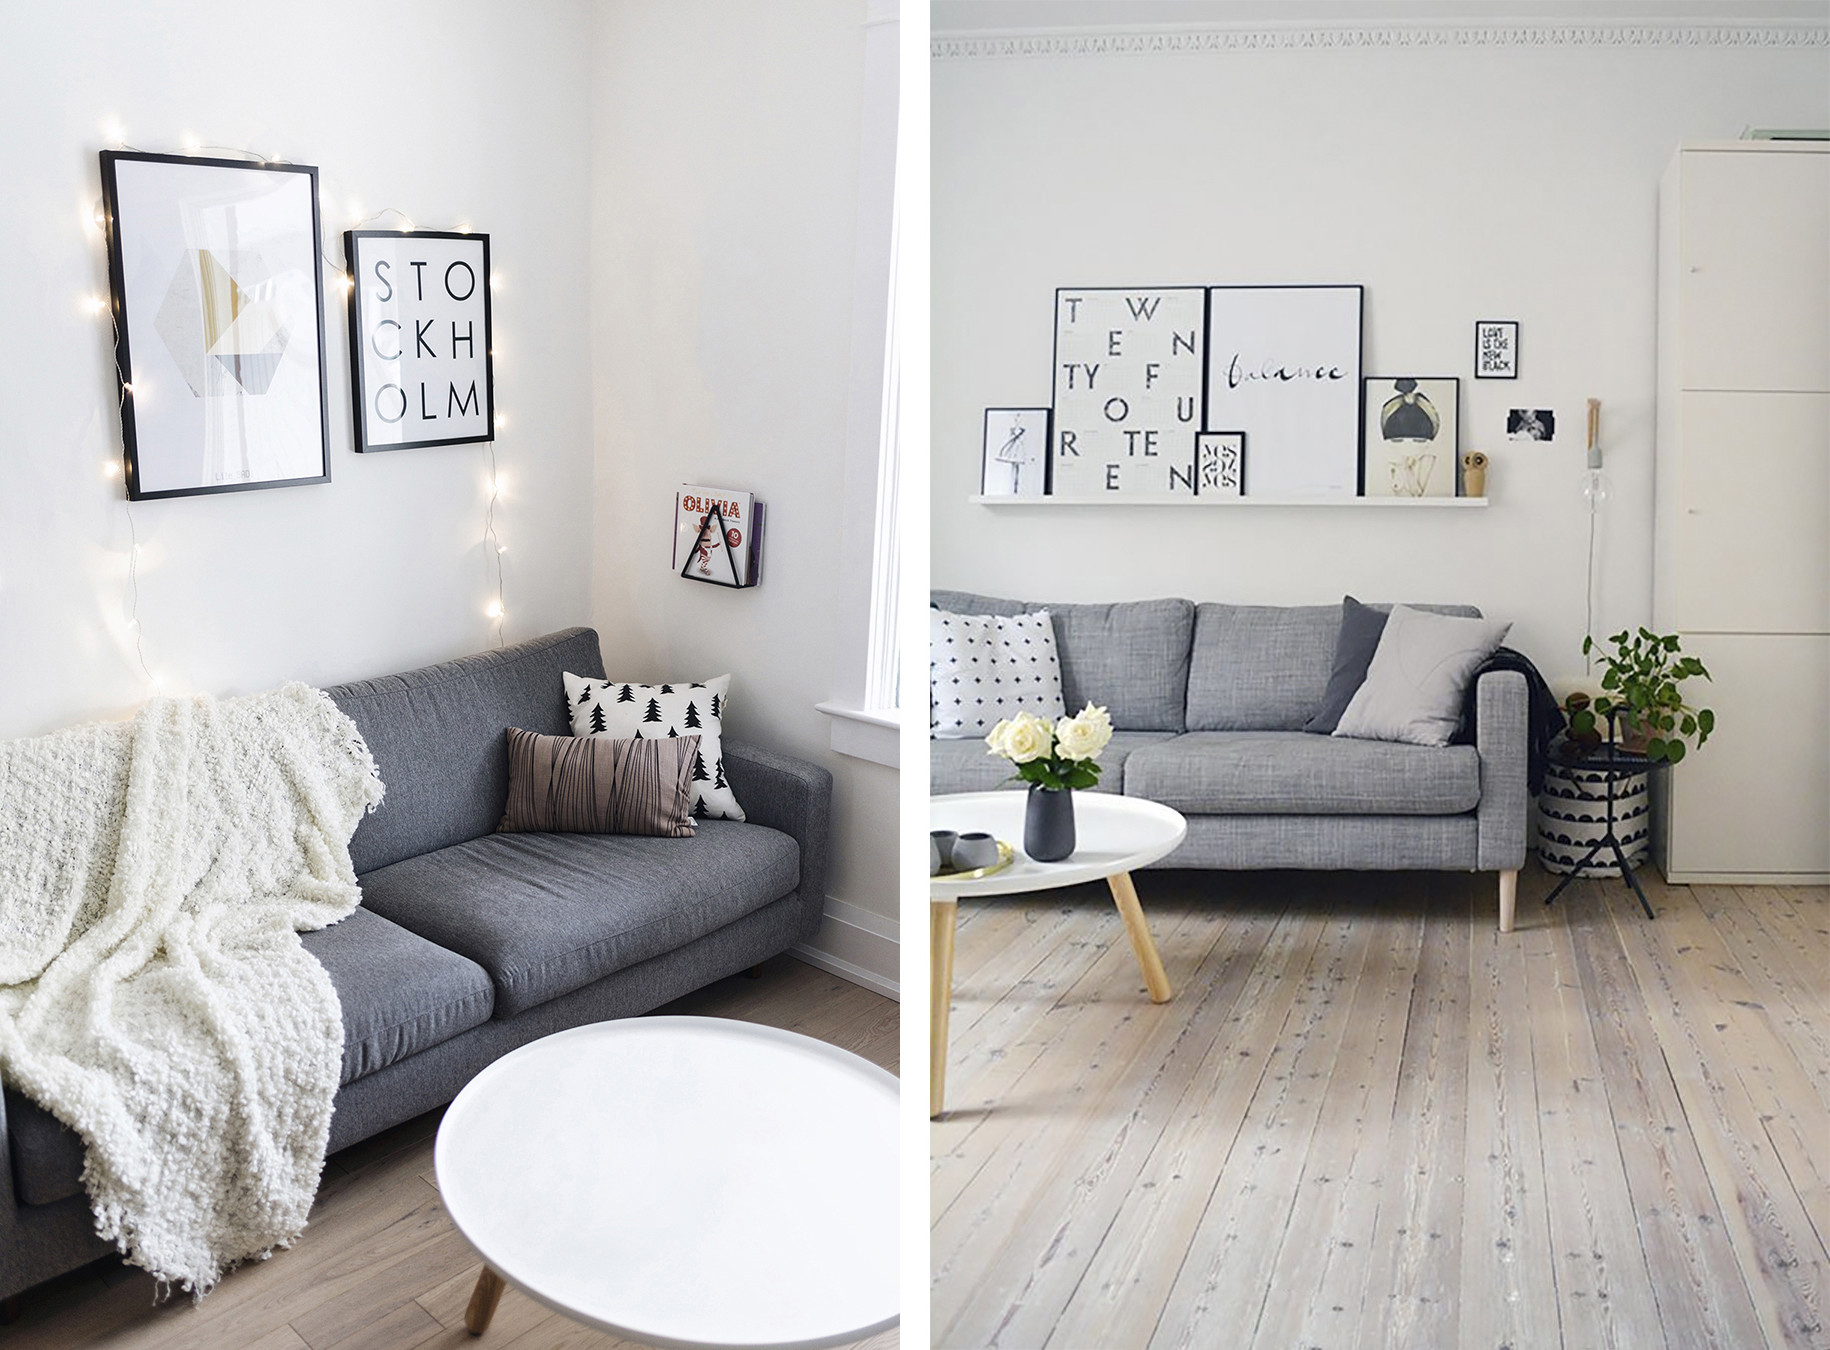 Grey Sofa Living Room Ideas
 Top 10 Tips for Adding Scandinavian Style to Your Home